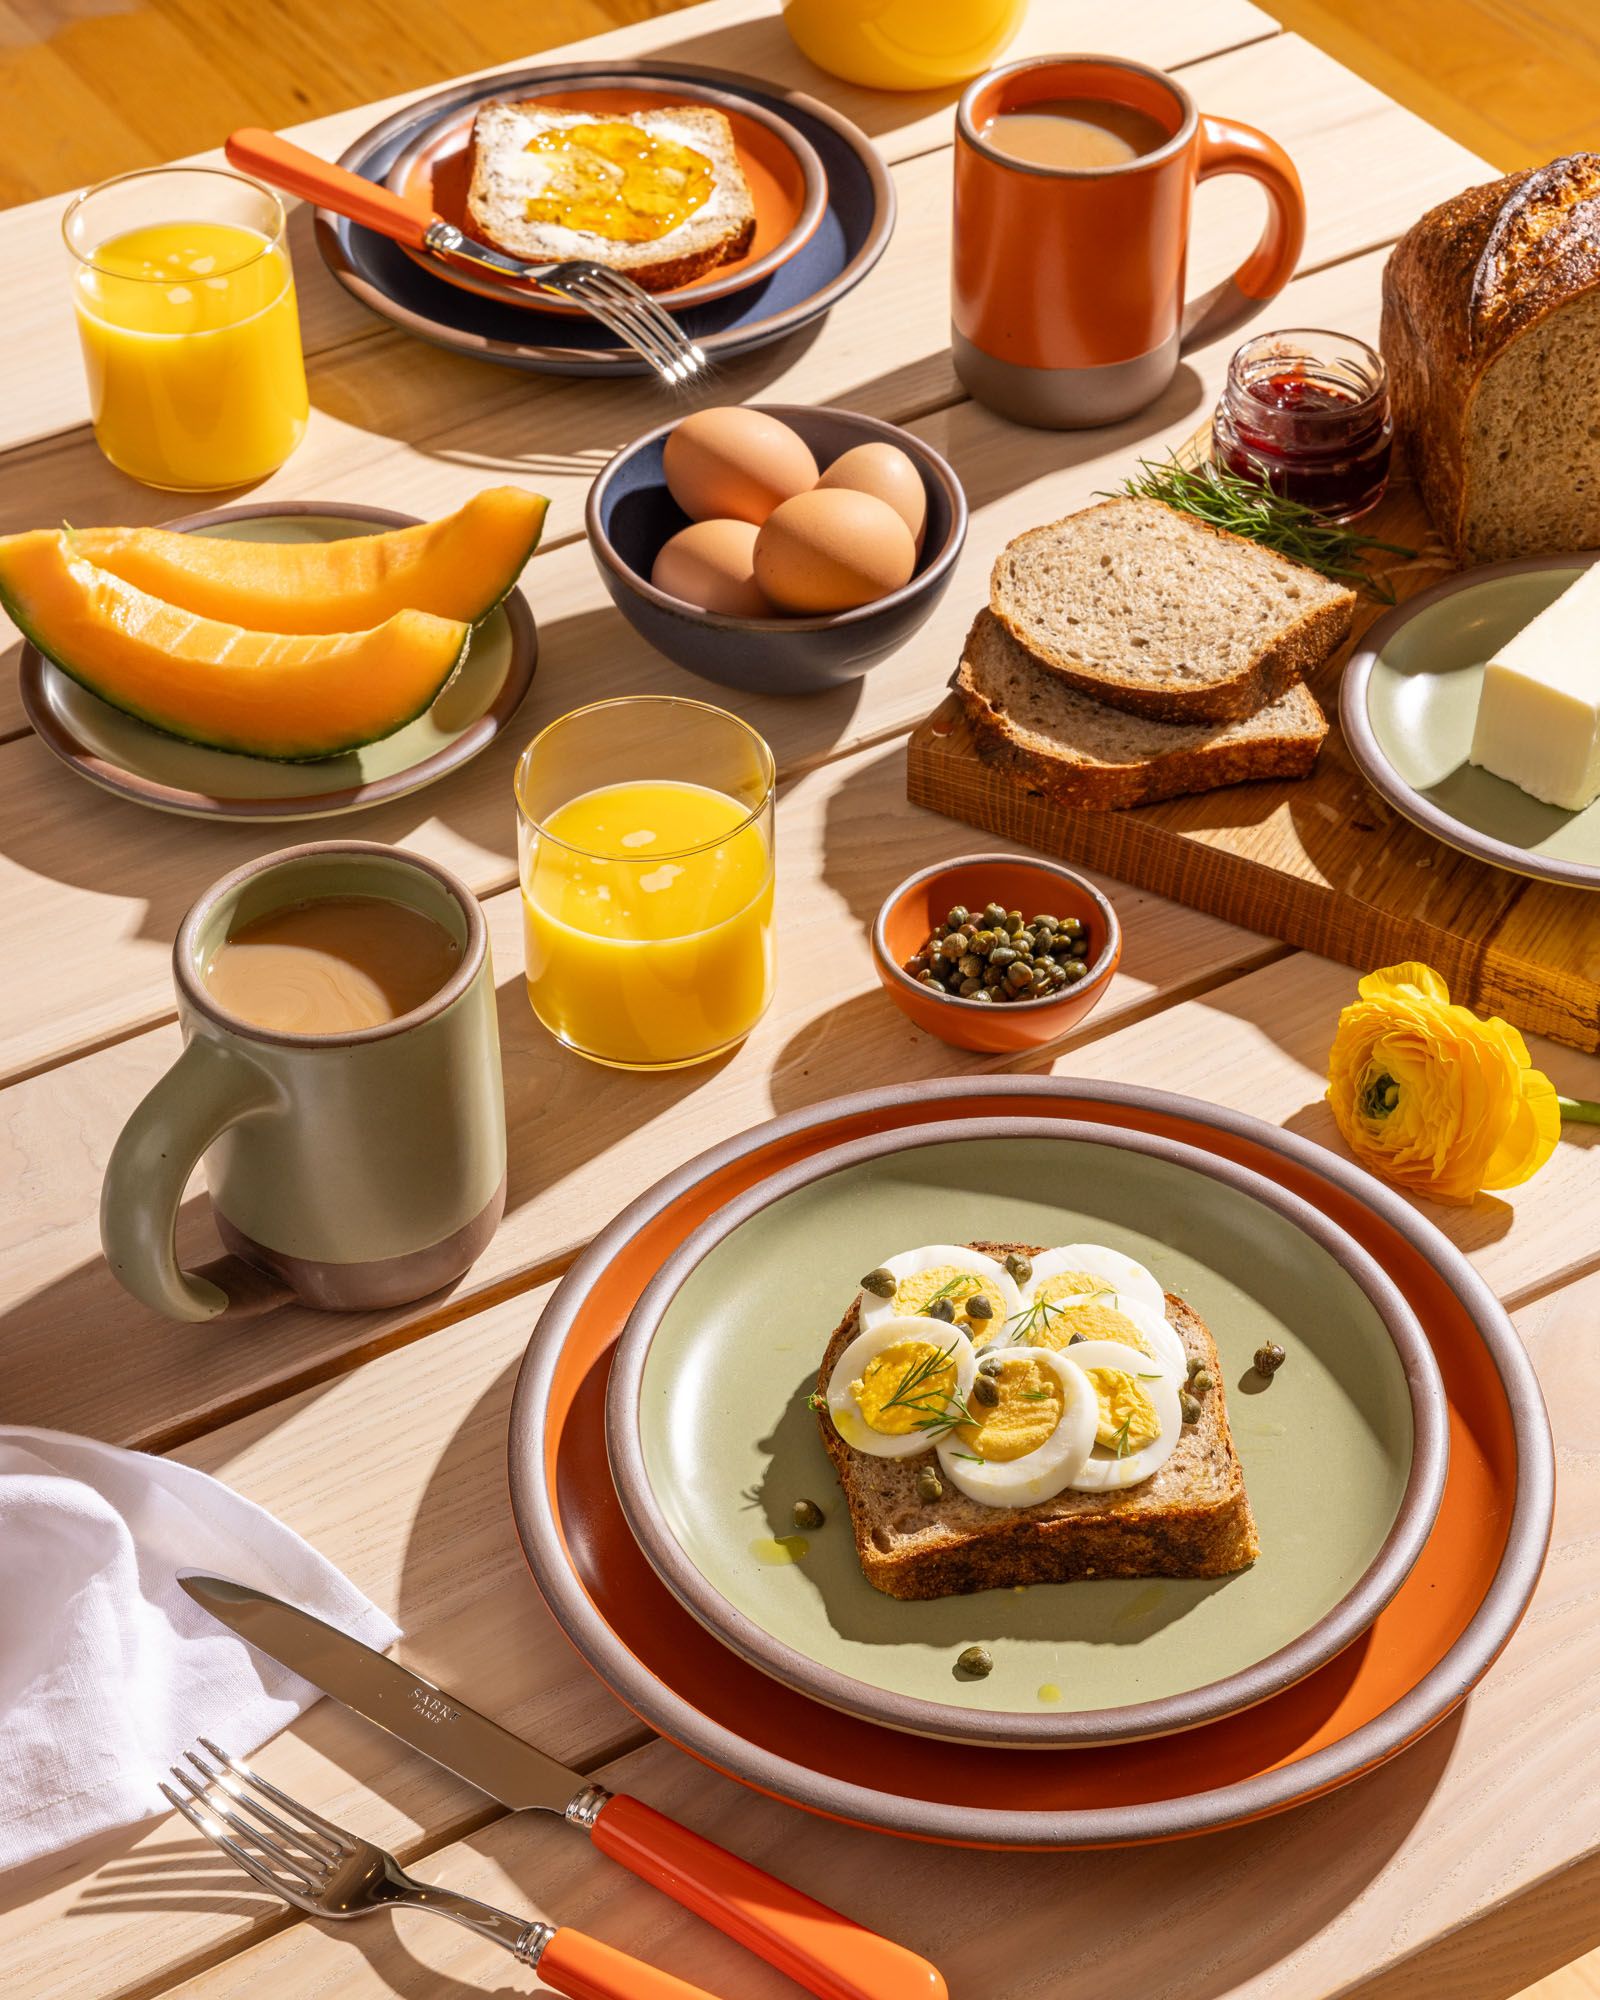 On a wooden table, there is a breakfast spread plated on ceramic pottery in sage green, bold orange, and muted navy colors. Surrounding are juice glasses filled with orange juice, bold orange handled flatware, a wooden cutting board topped with bread, butter, and jam.